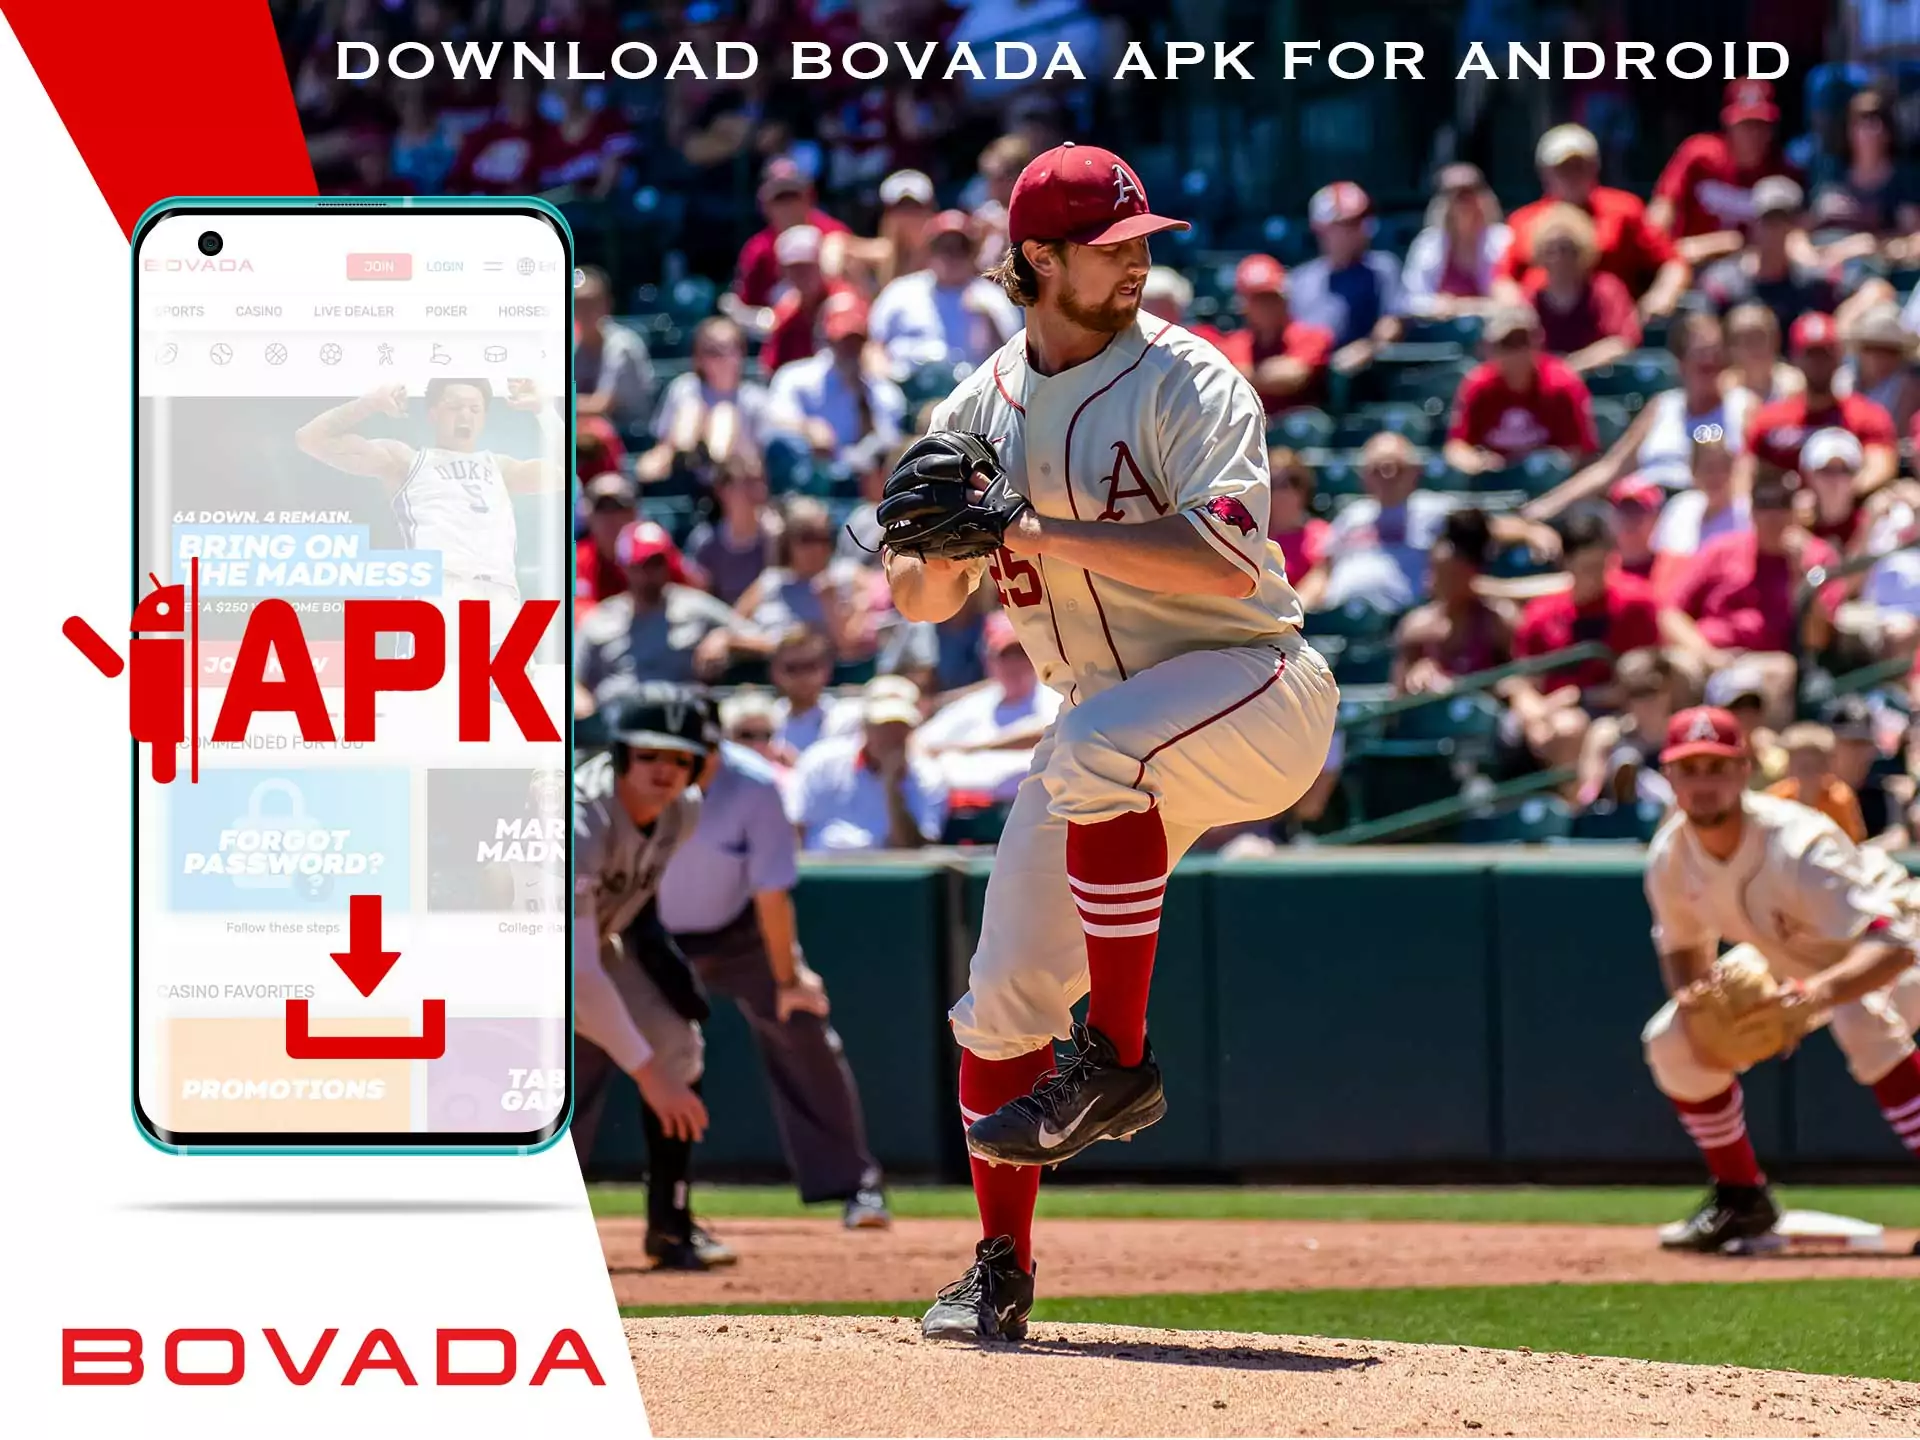 Get Bovada app in your Android smartphone.